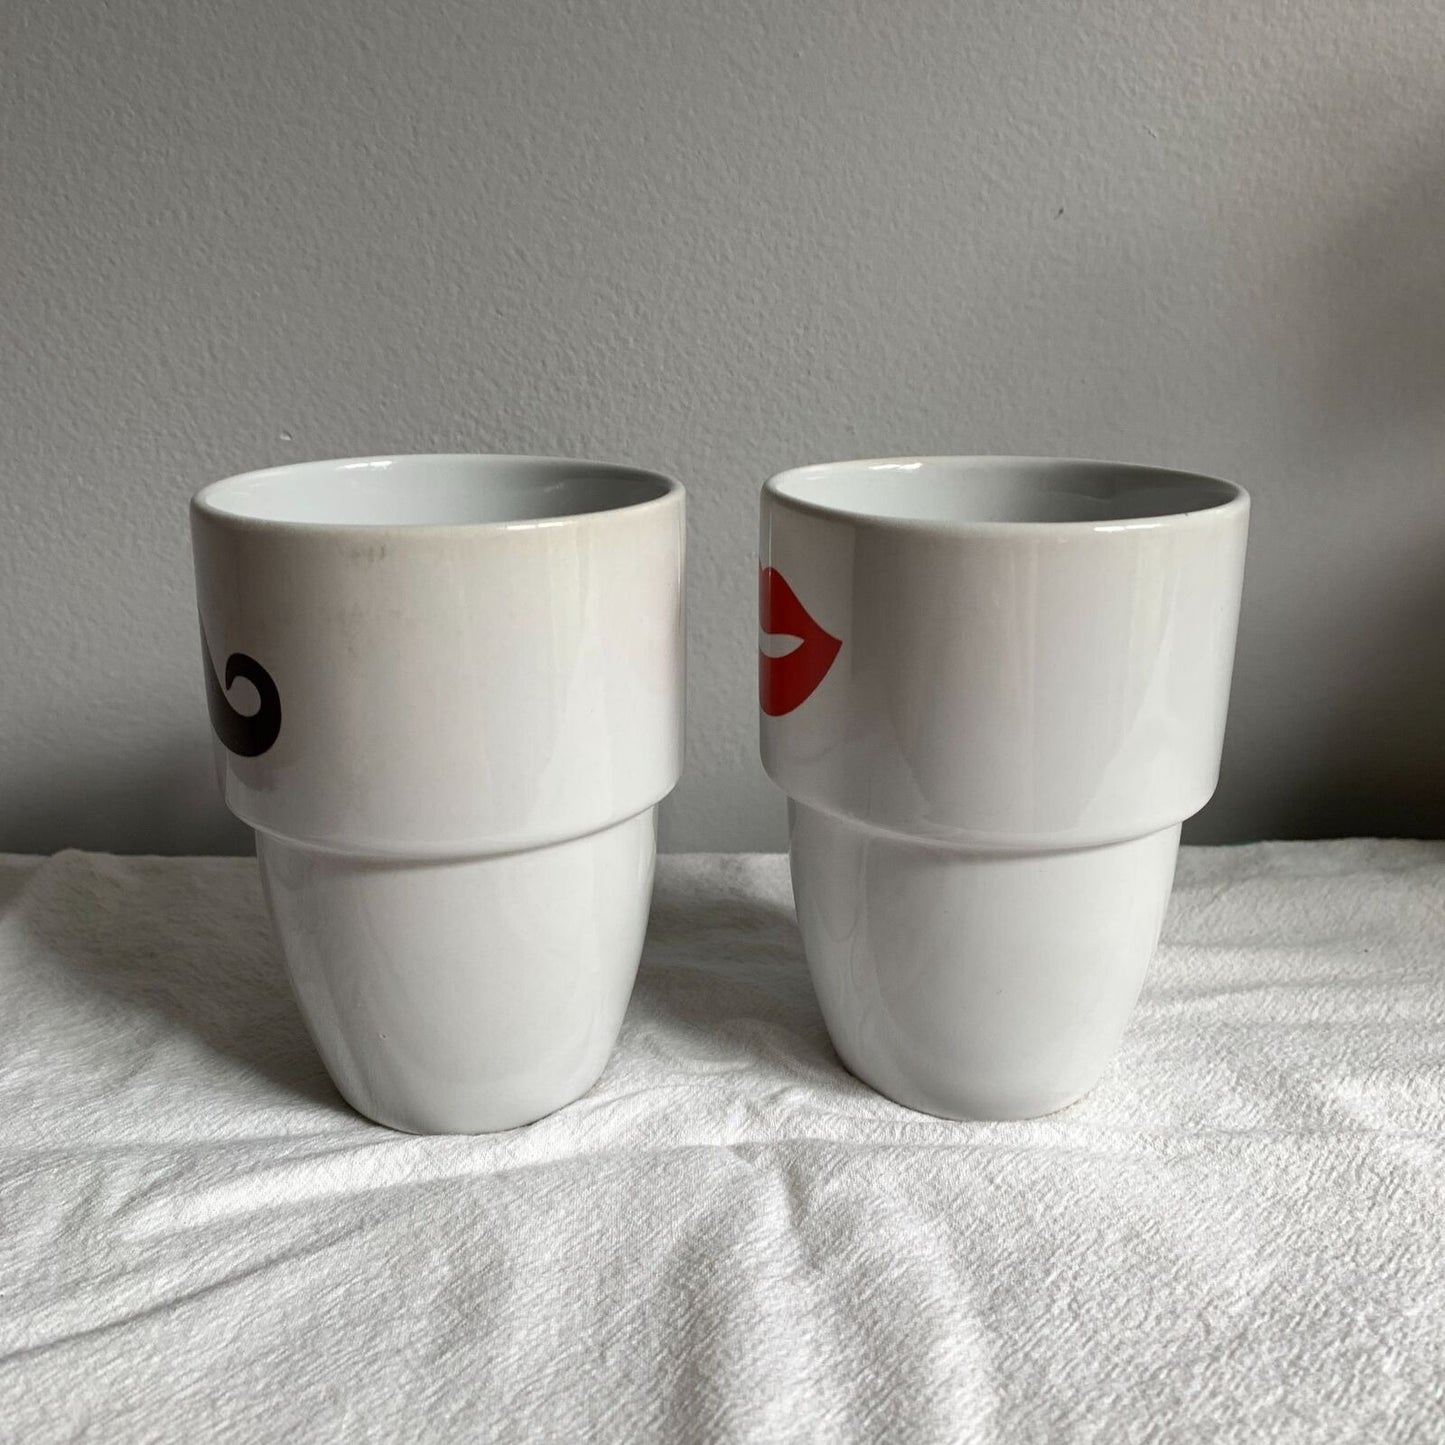 Caribou Coffee His and Hers Mustache Lips Coffee Mugs Pair of 2